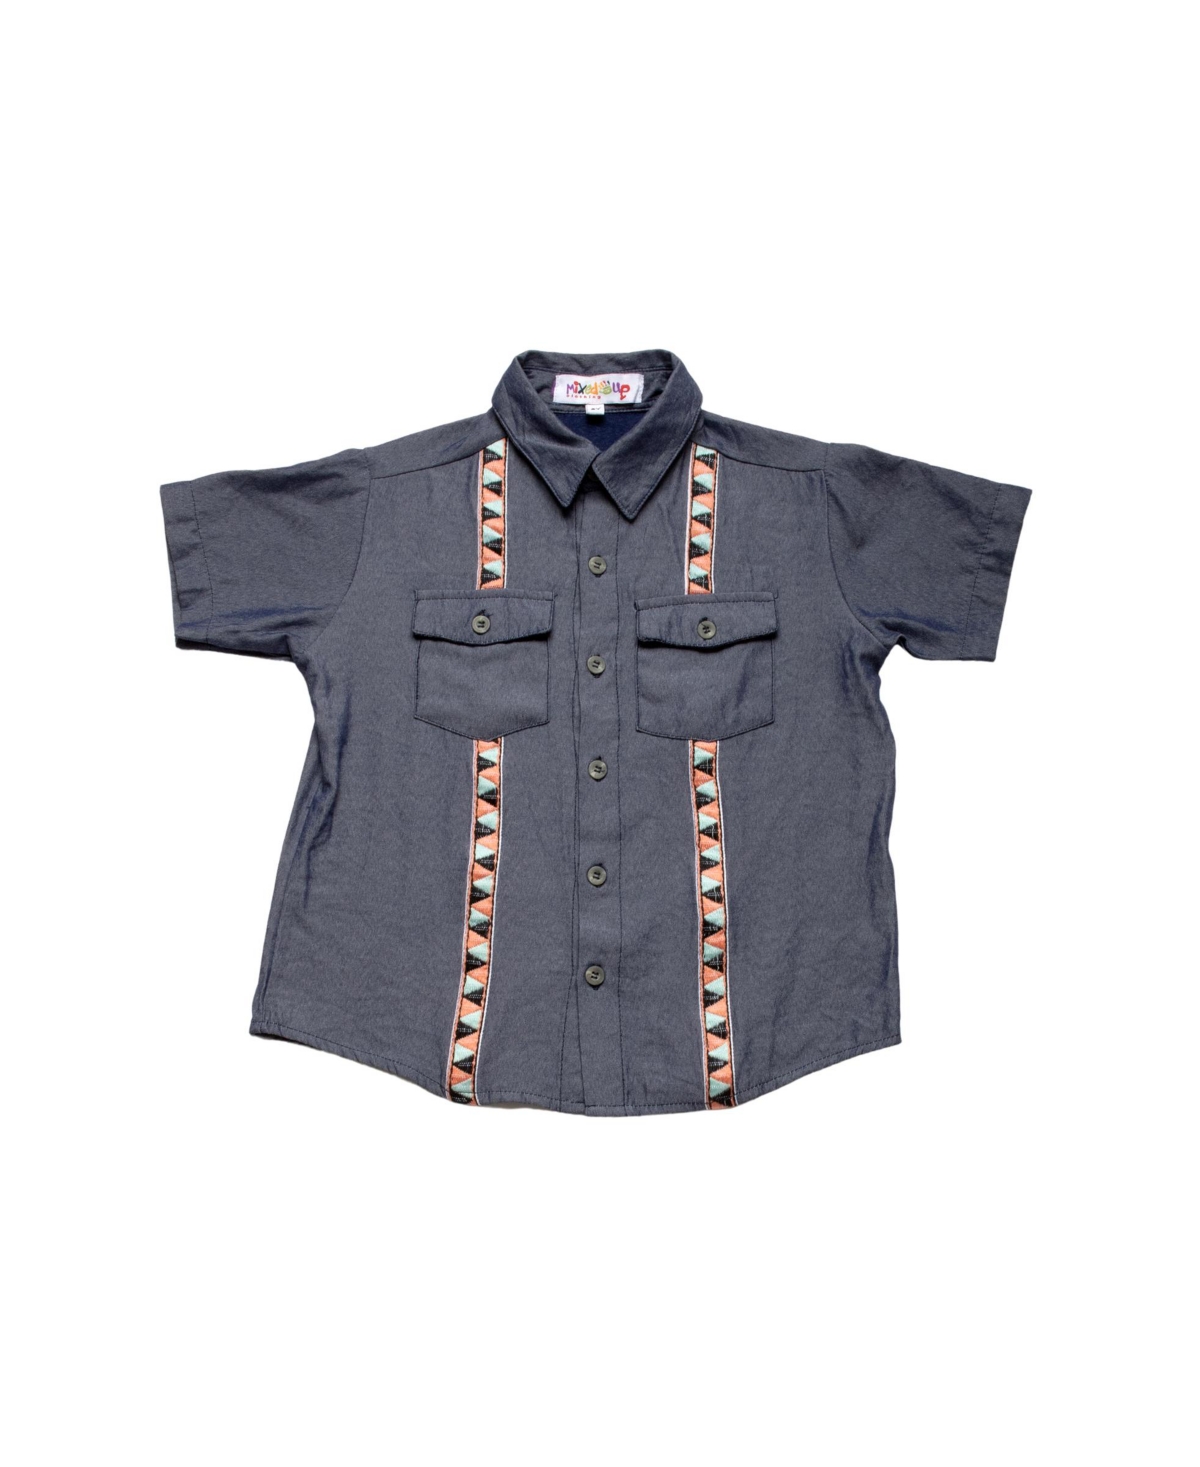 Mixed Up Clothing Toddler Boys Short Sleeves Button Down Pocket Shirt In Dark Blue